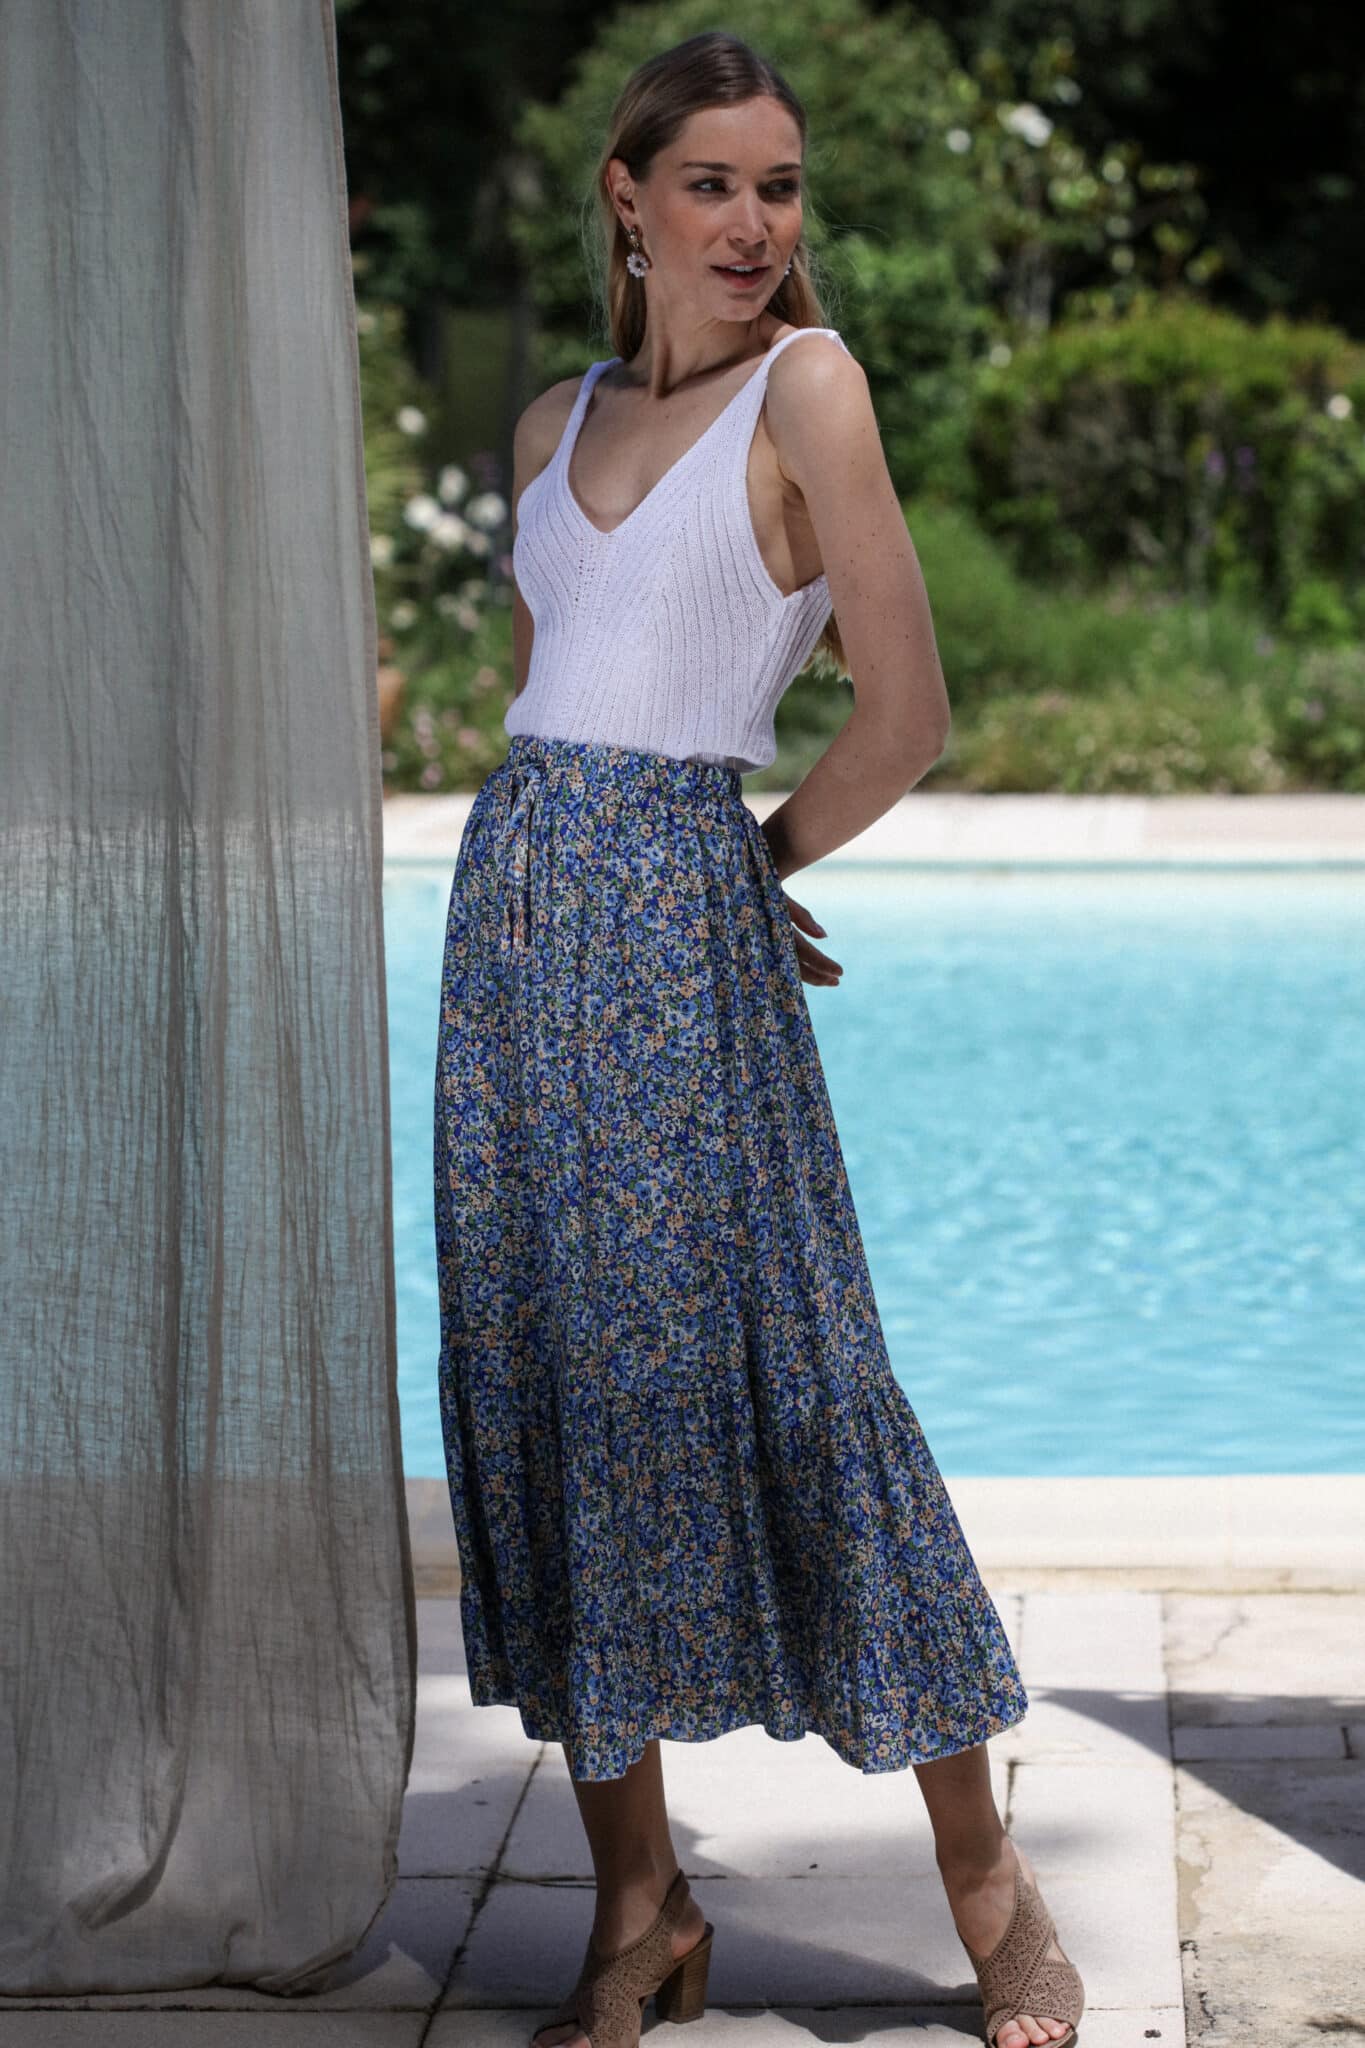 Photo shoot by the pool Long flowered blue skirt